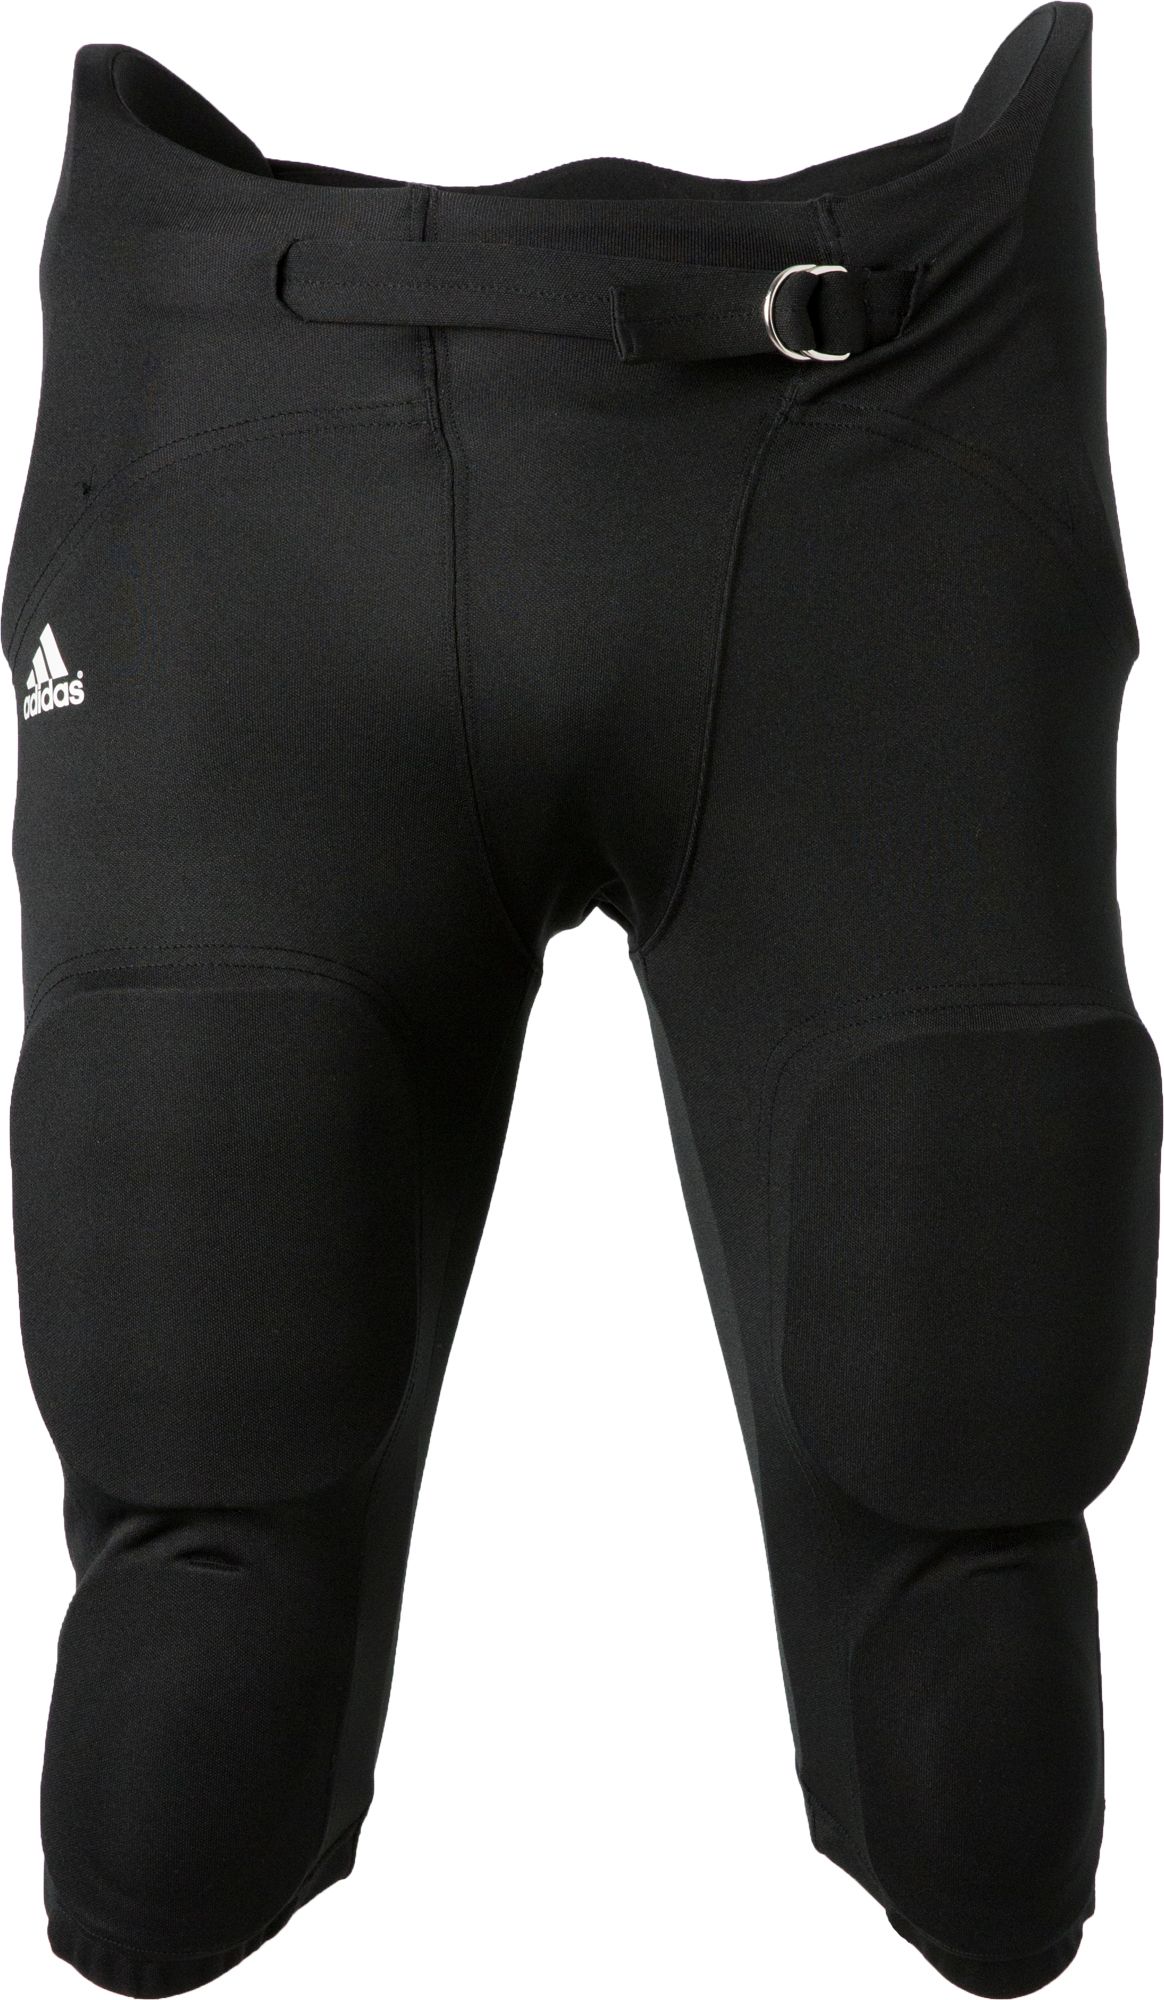 under armour men's integrated football pants